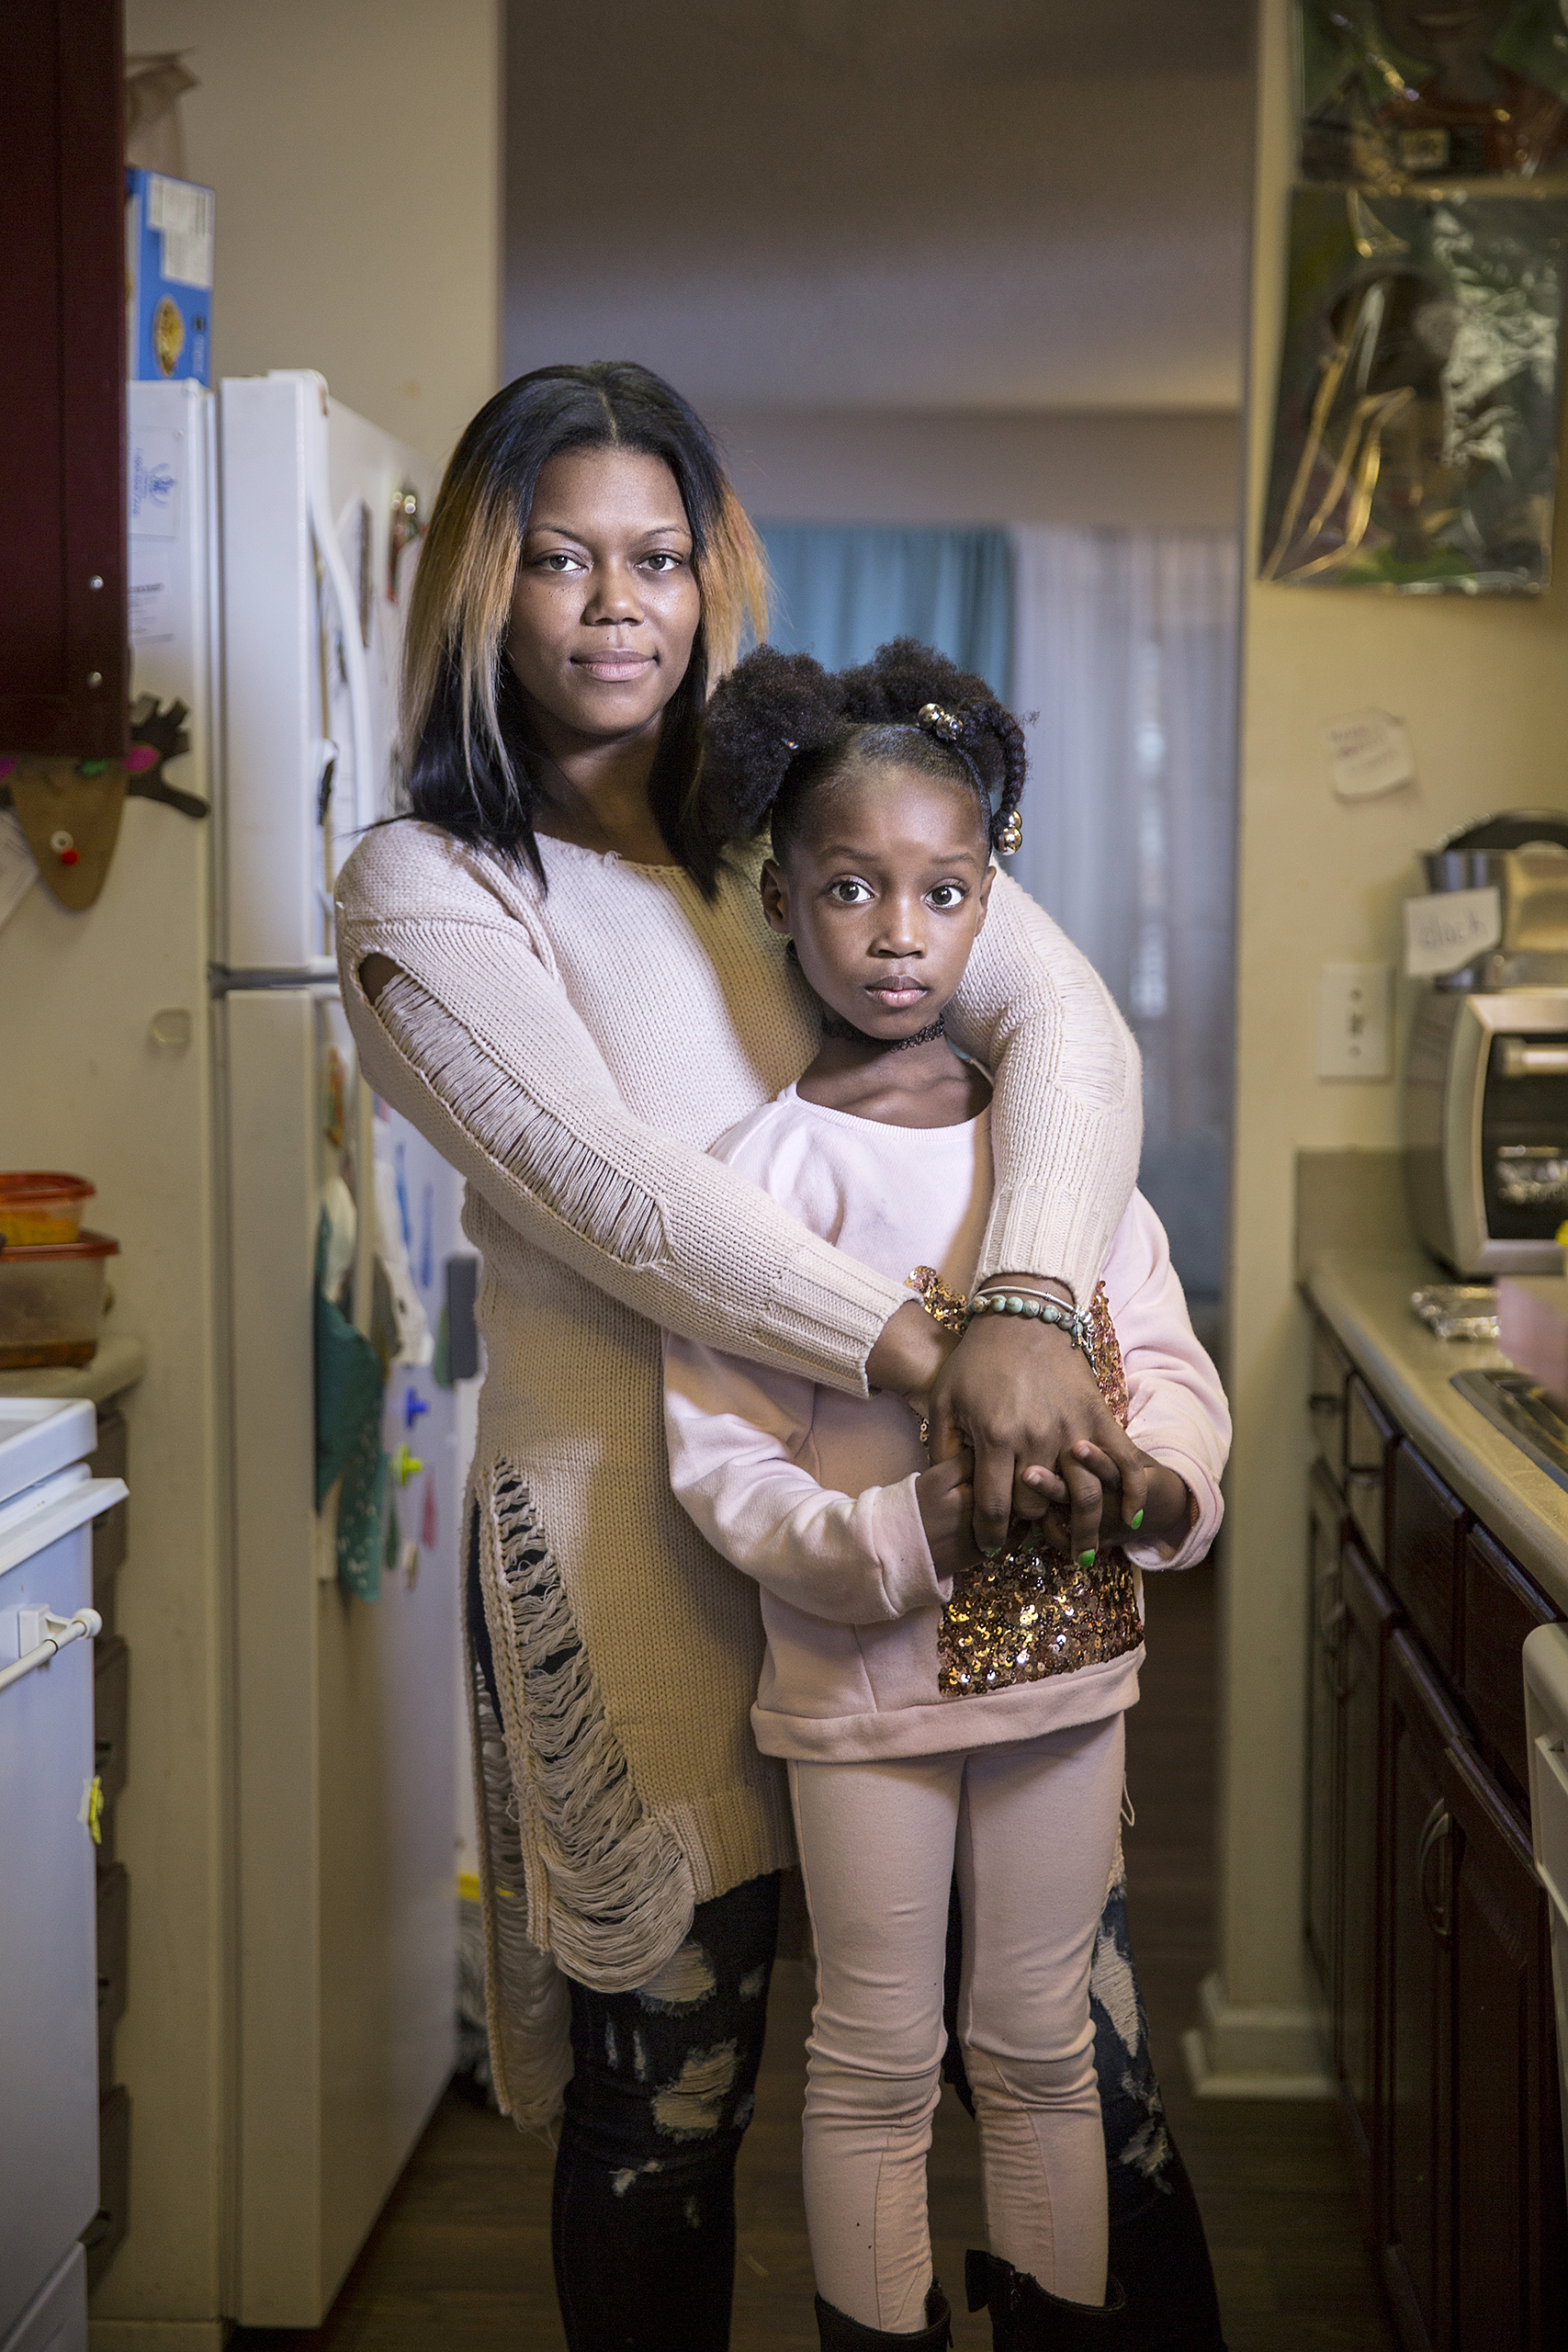 Masonia Traylor, with daughter Marissa, 5: “I did everything I needed to do to make sure she got here HIV-negative. She needs to do what she has to do to stay that way.” (Fernando Decillis for TIME)